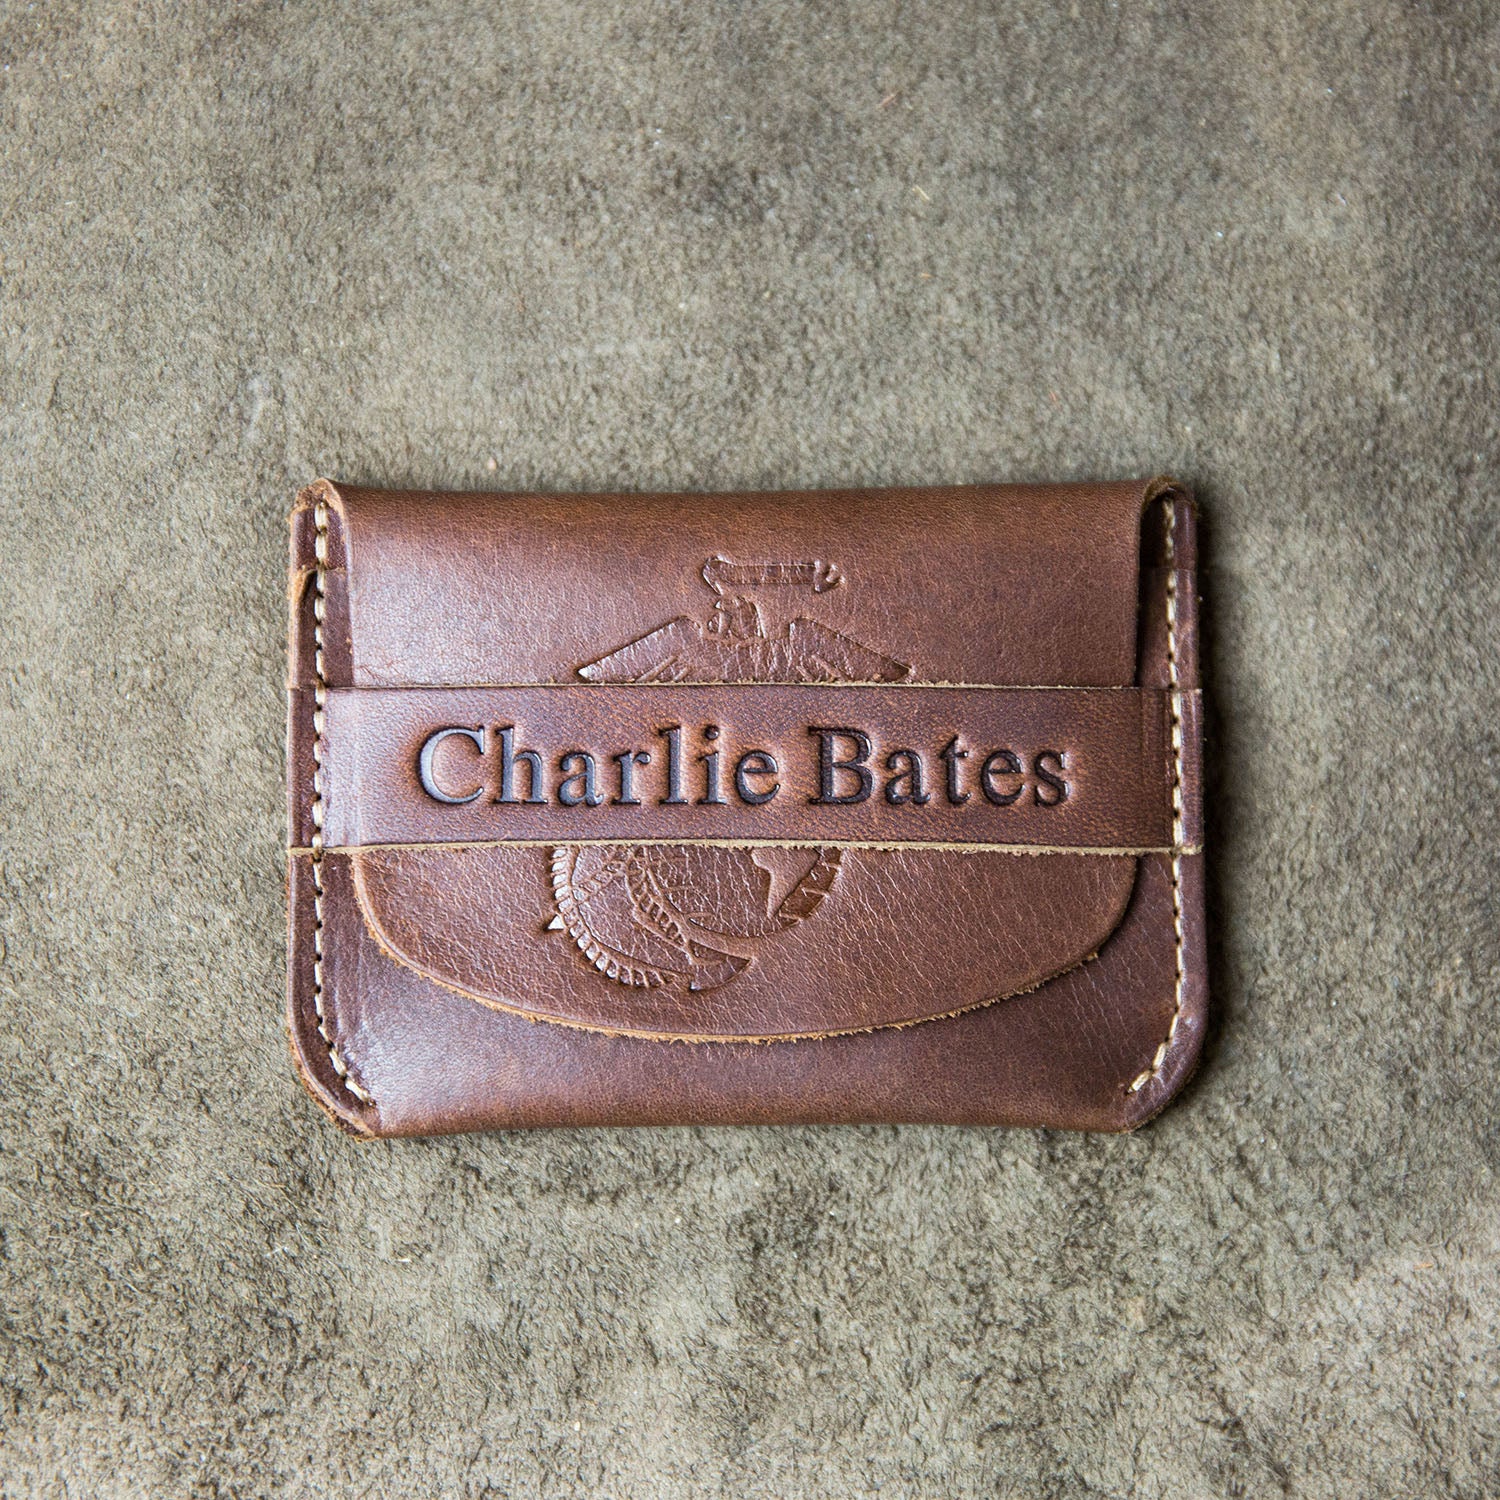 Fine leather front pocket wallet with flap closure and Marine Corps logo